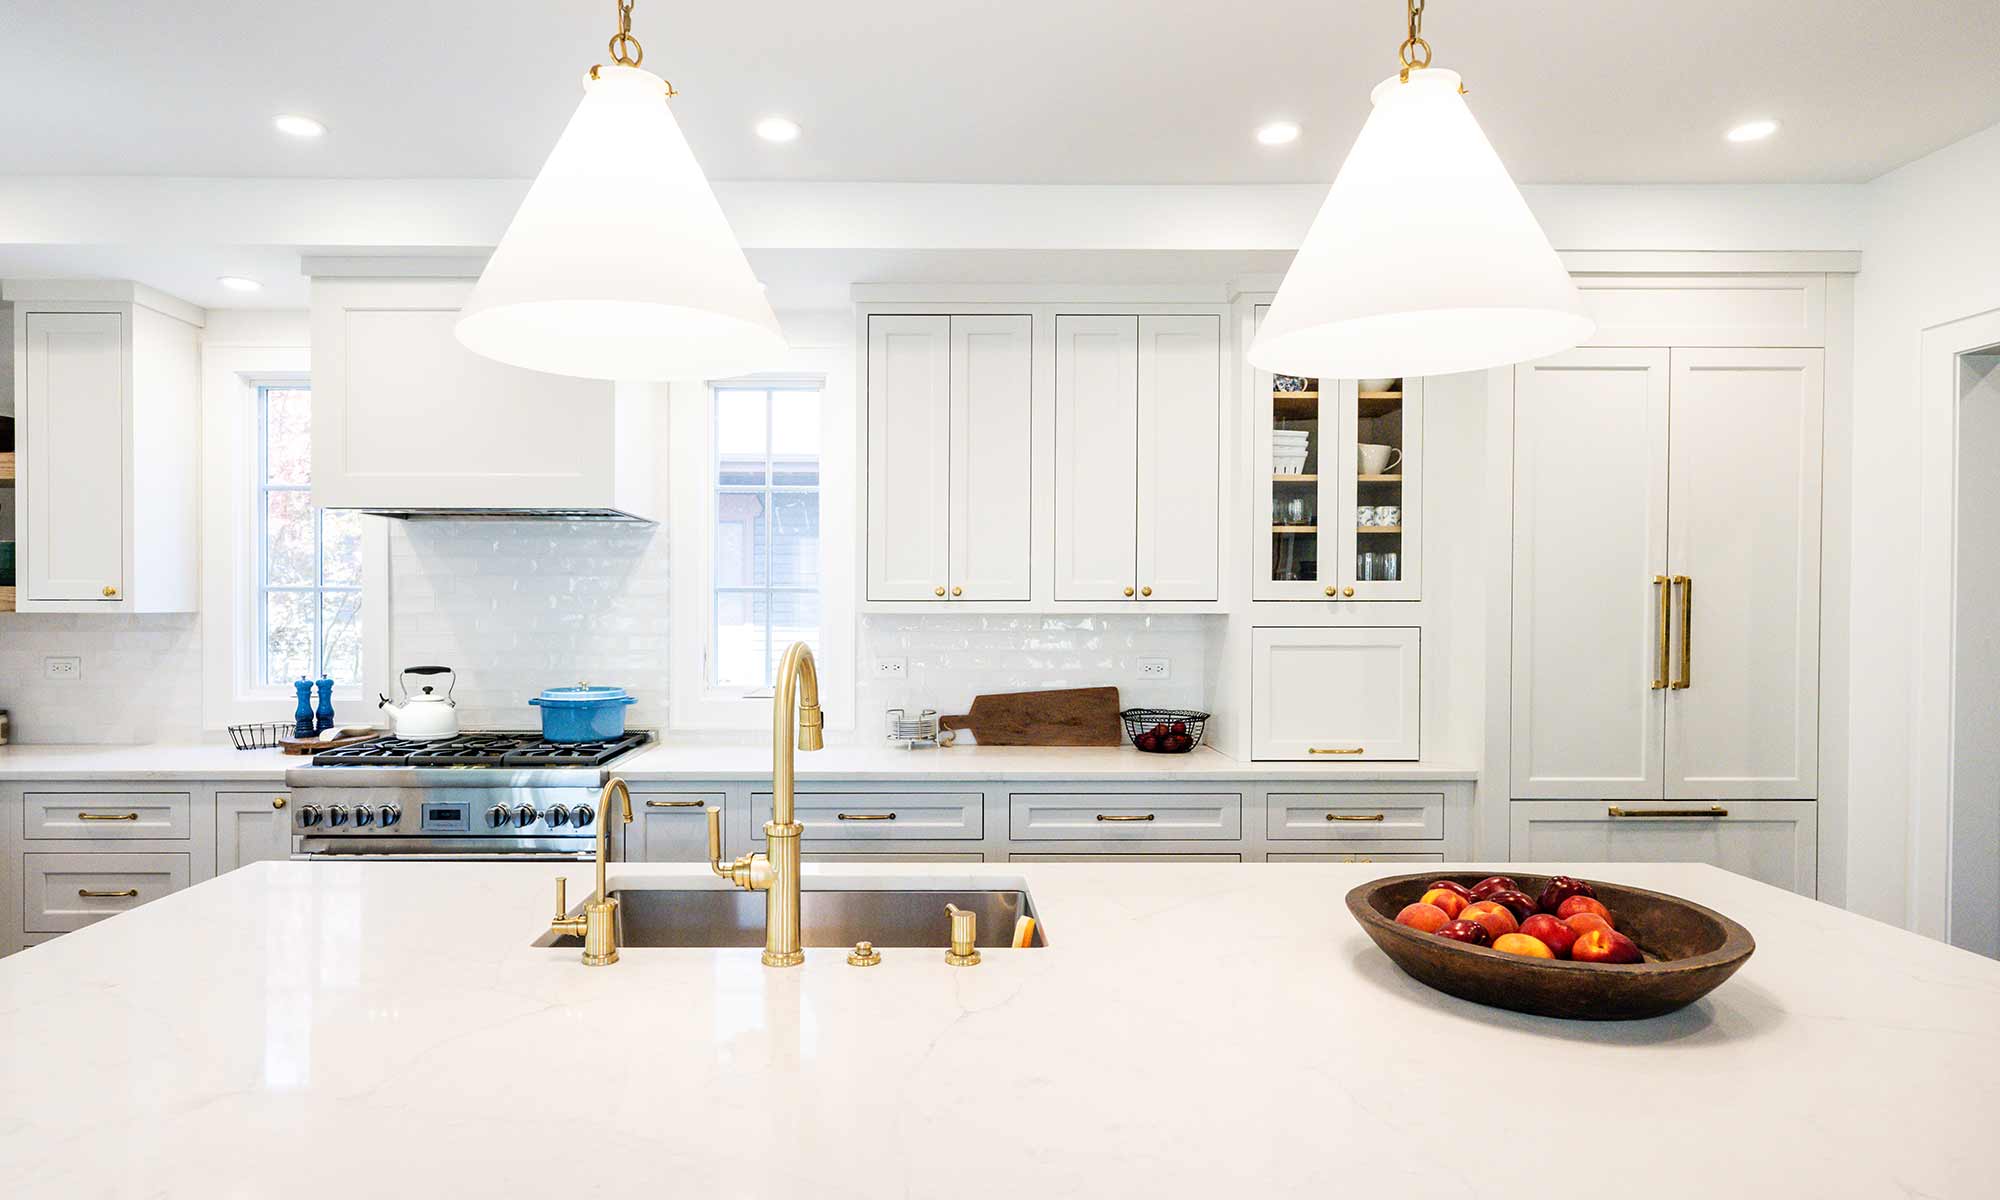 Luxury remodel and kitchen island with white and blue cabinets and white quartz countertops